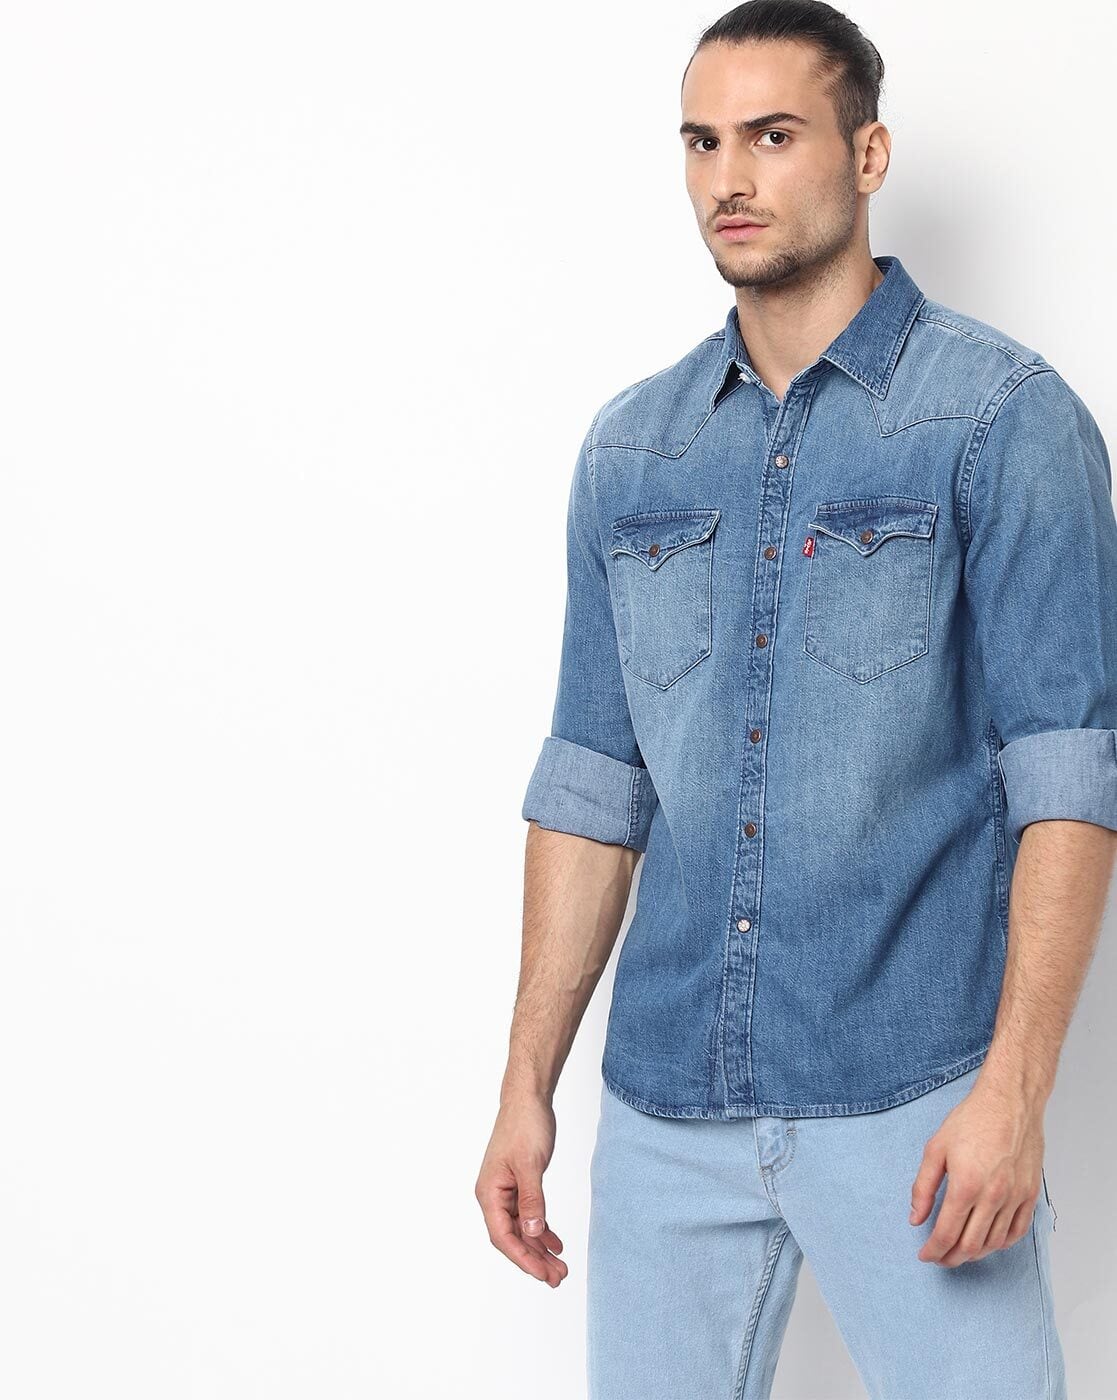 Buy Blue Shirts for Men by Forca by Lifestyle Online | Ajio.com